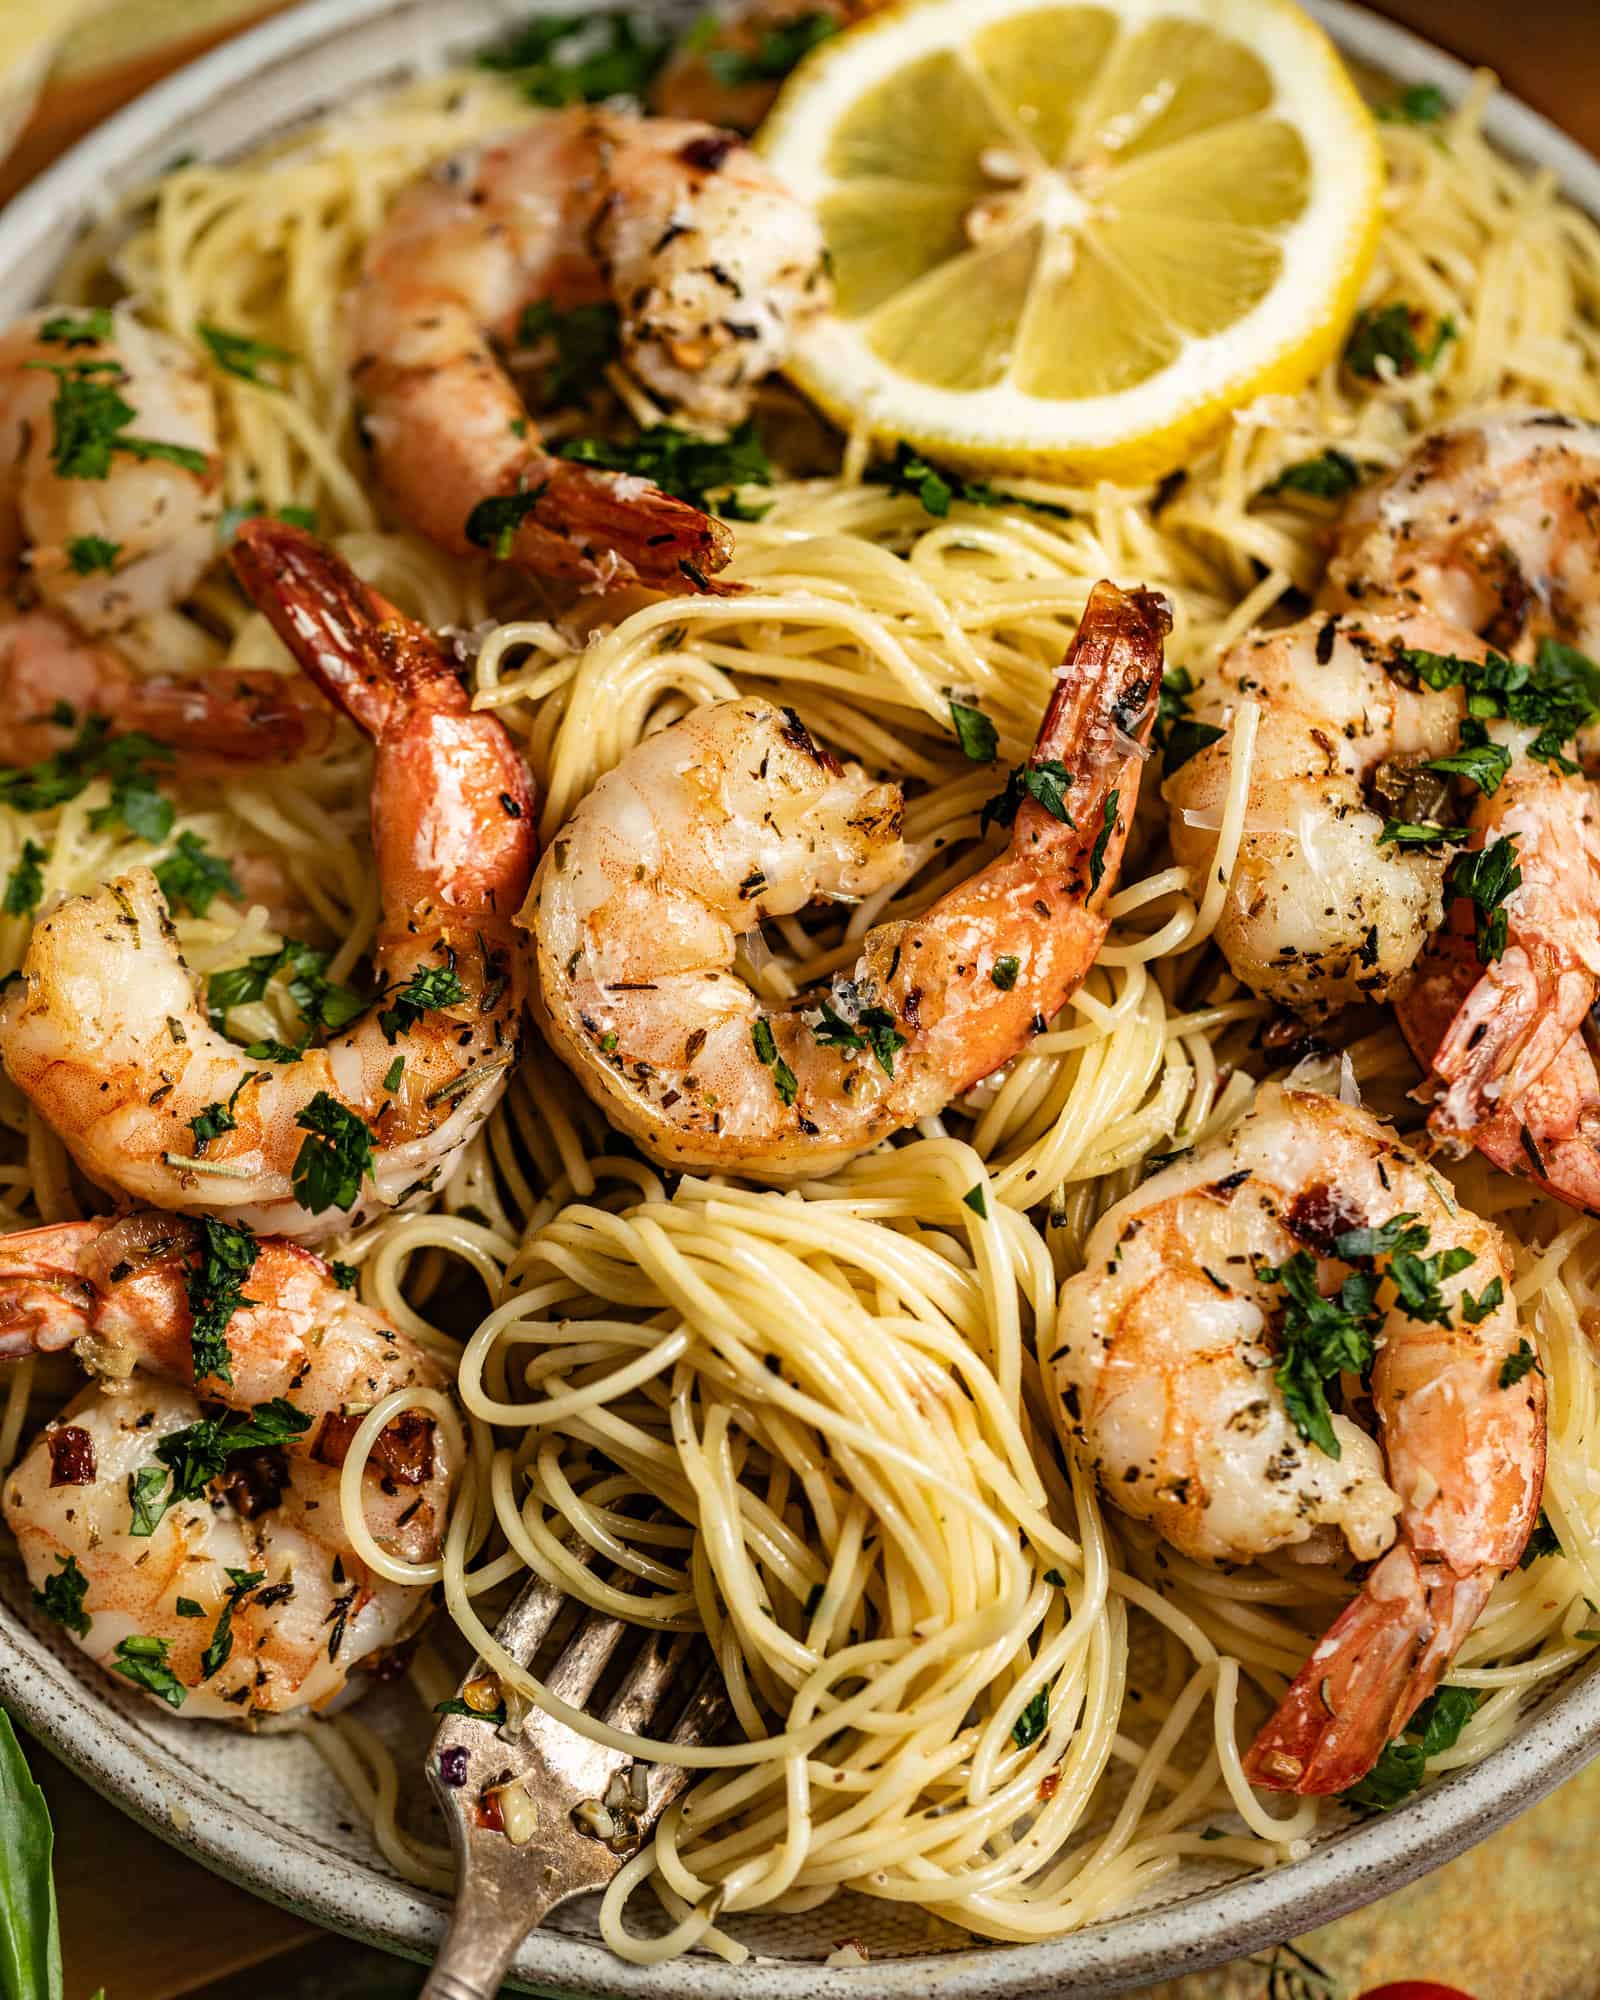 Shrimp scampi with lemon wedges over pasta and fresh parsley.